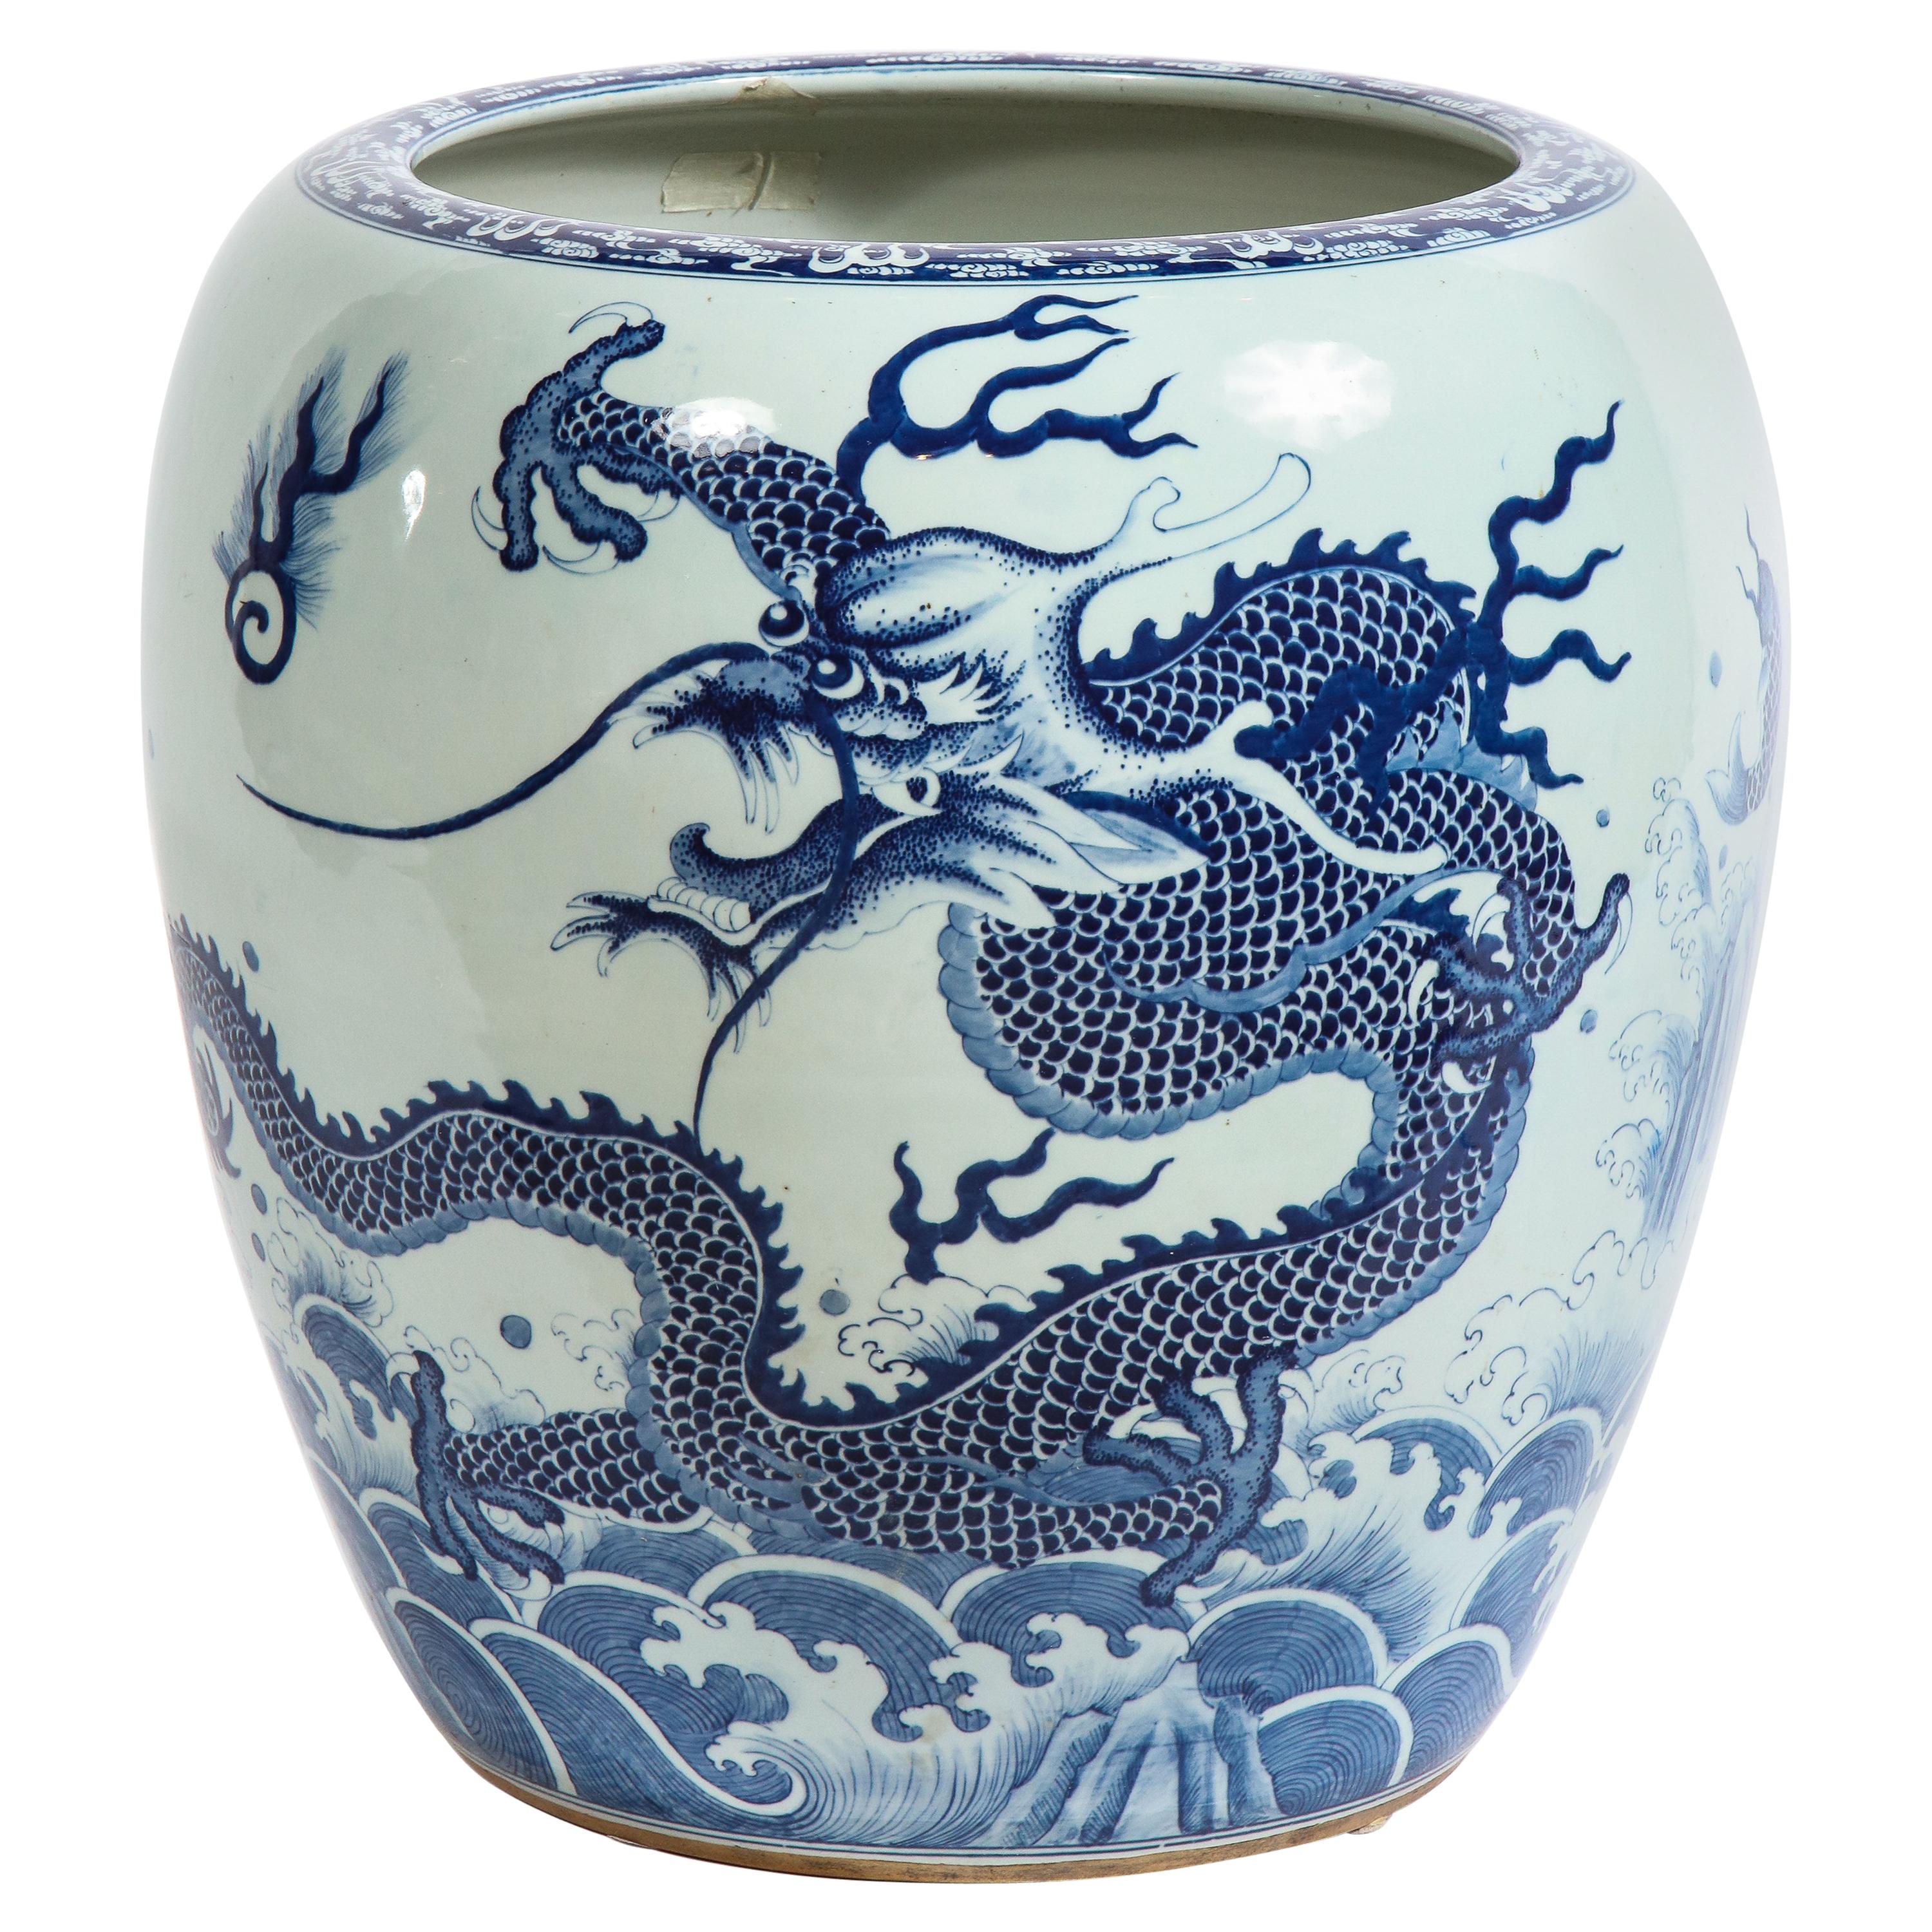 Chinese Blue and White Porcelain Dragon & Koi Design Painted Jardiniere/Planter